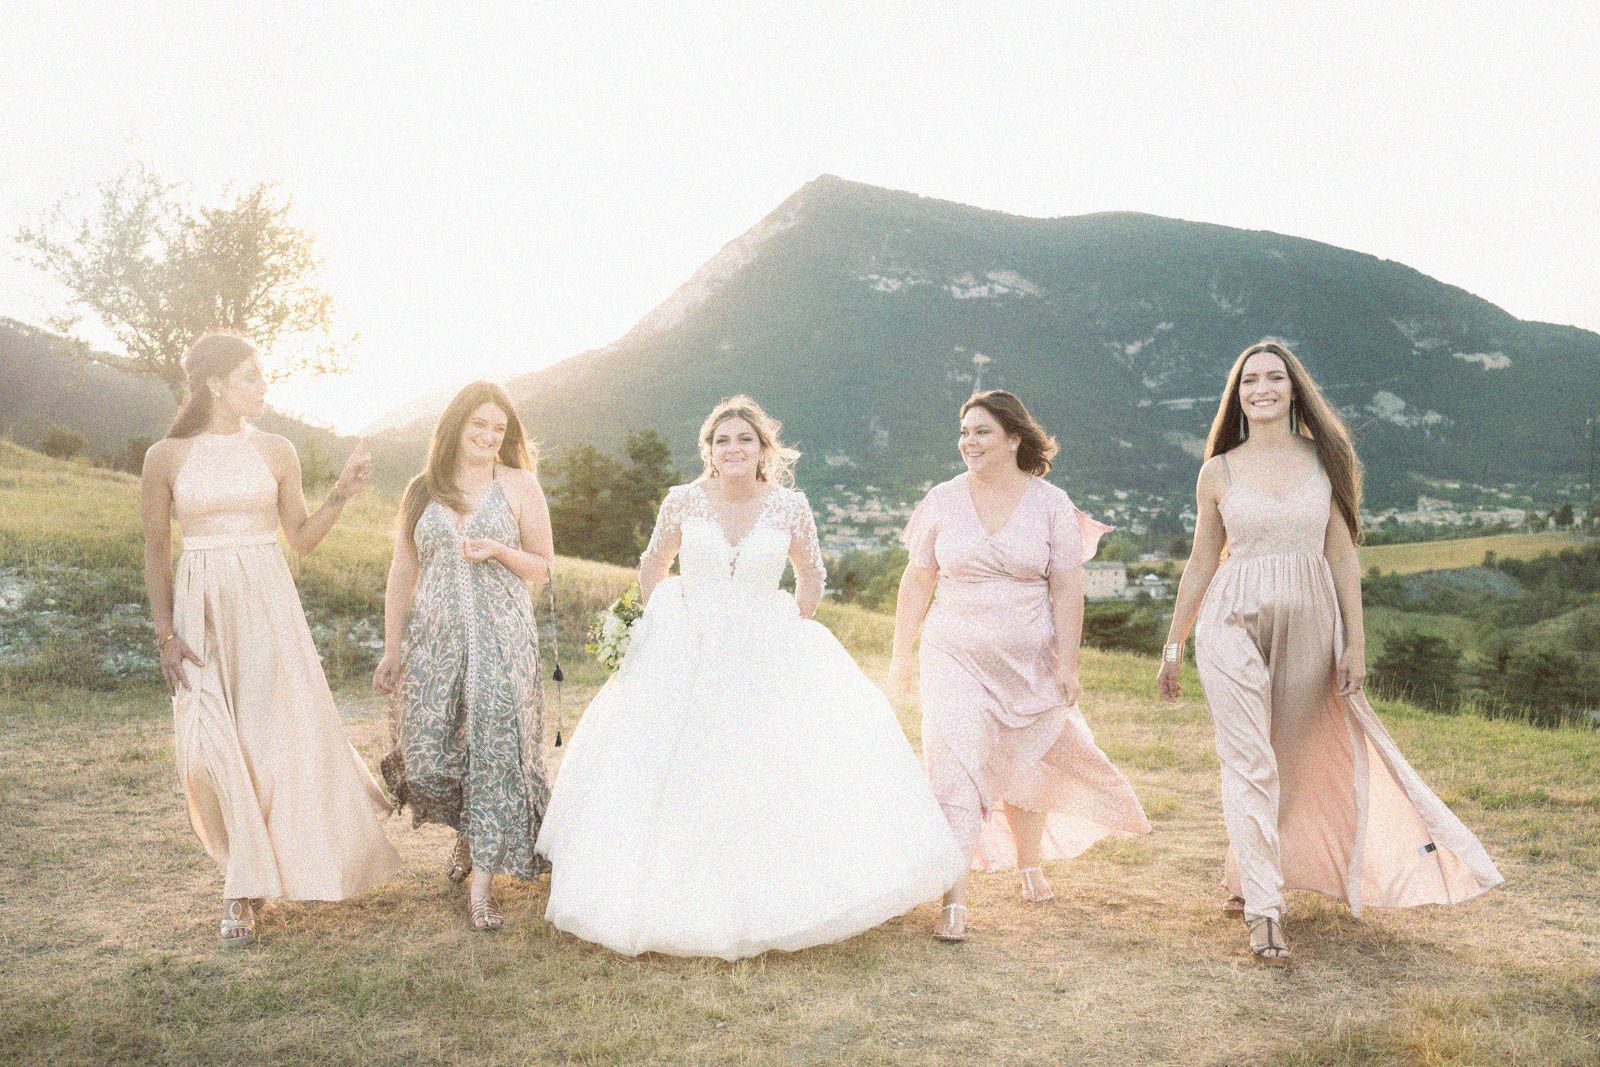 A bride and bridesmaids walk through the French Alps during sunset